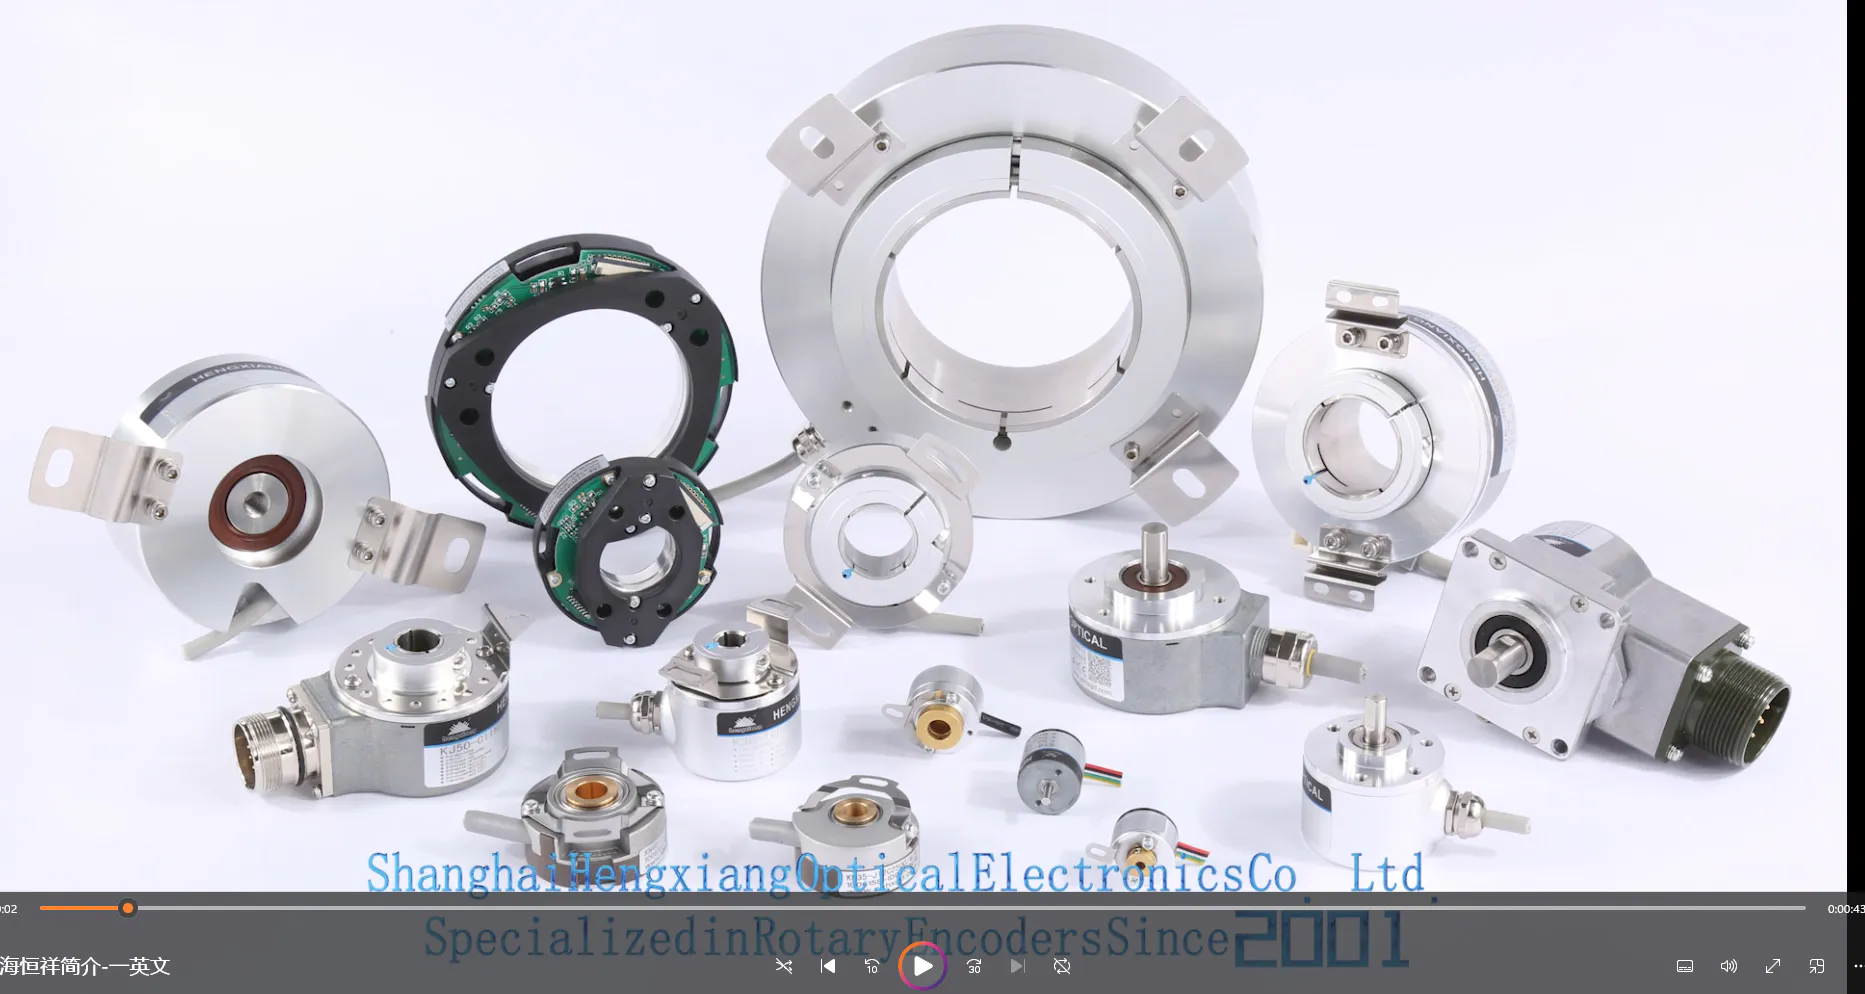 About our HENGXIANG ENCODER FACTORY